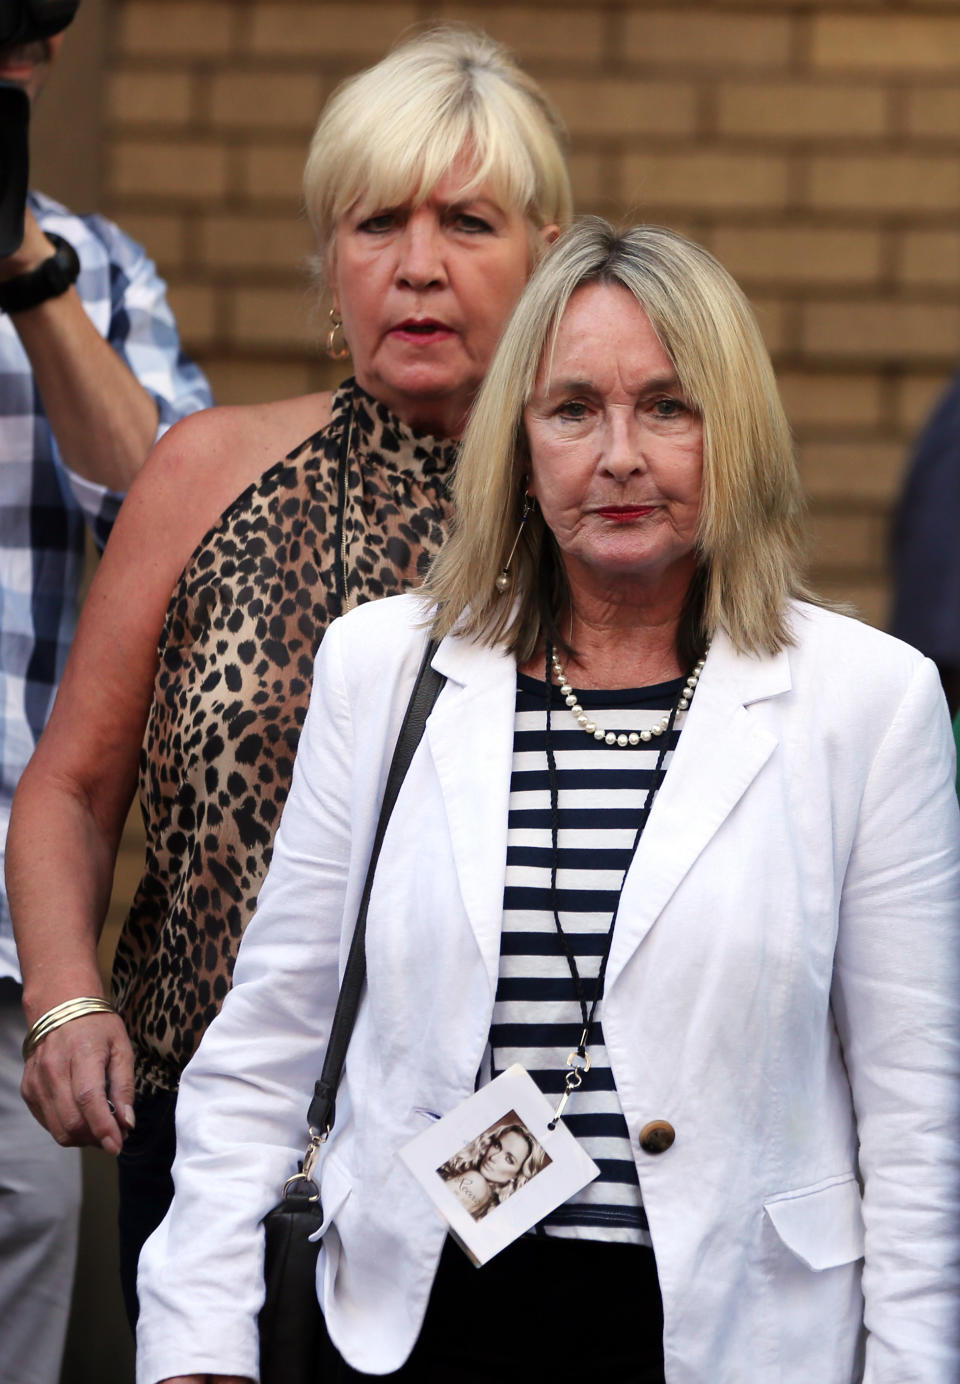 June Steenkamp, mother of Reeva Steenkamp, right, with unidentified woman leaves the high court in Pretoria, South Africa, Monday, March 24, 2014. Oscar Pistorius is charged with murder for the shooting death of his girlfriend, Reeva Steenkamp, on Valentines Day in 2013. (AP Photo/Themba Hadebe)